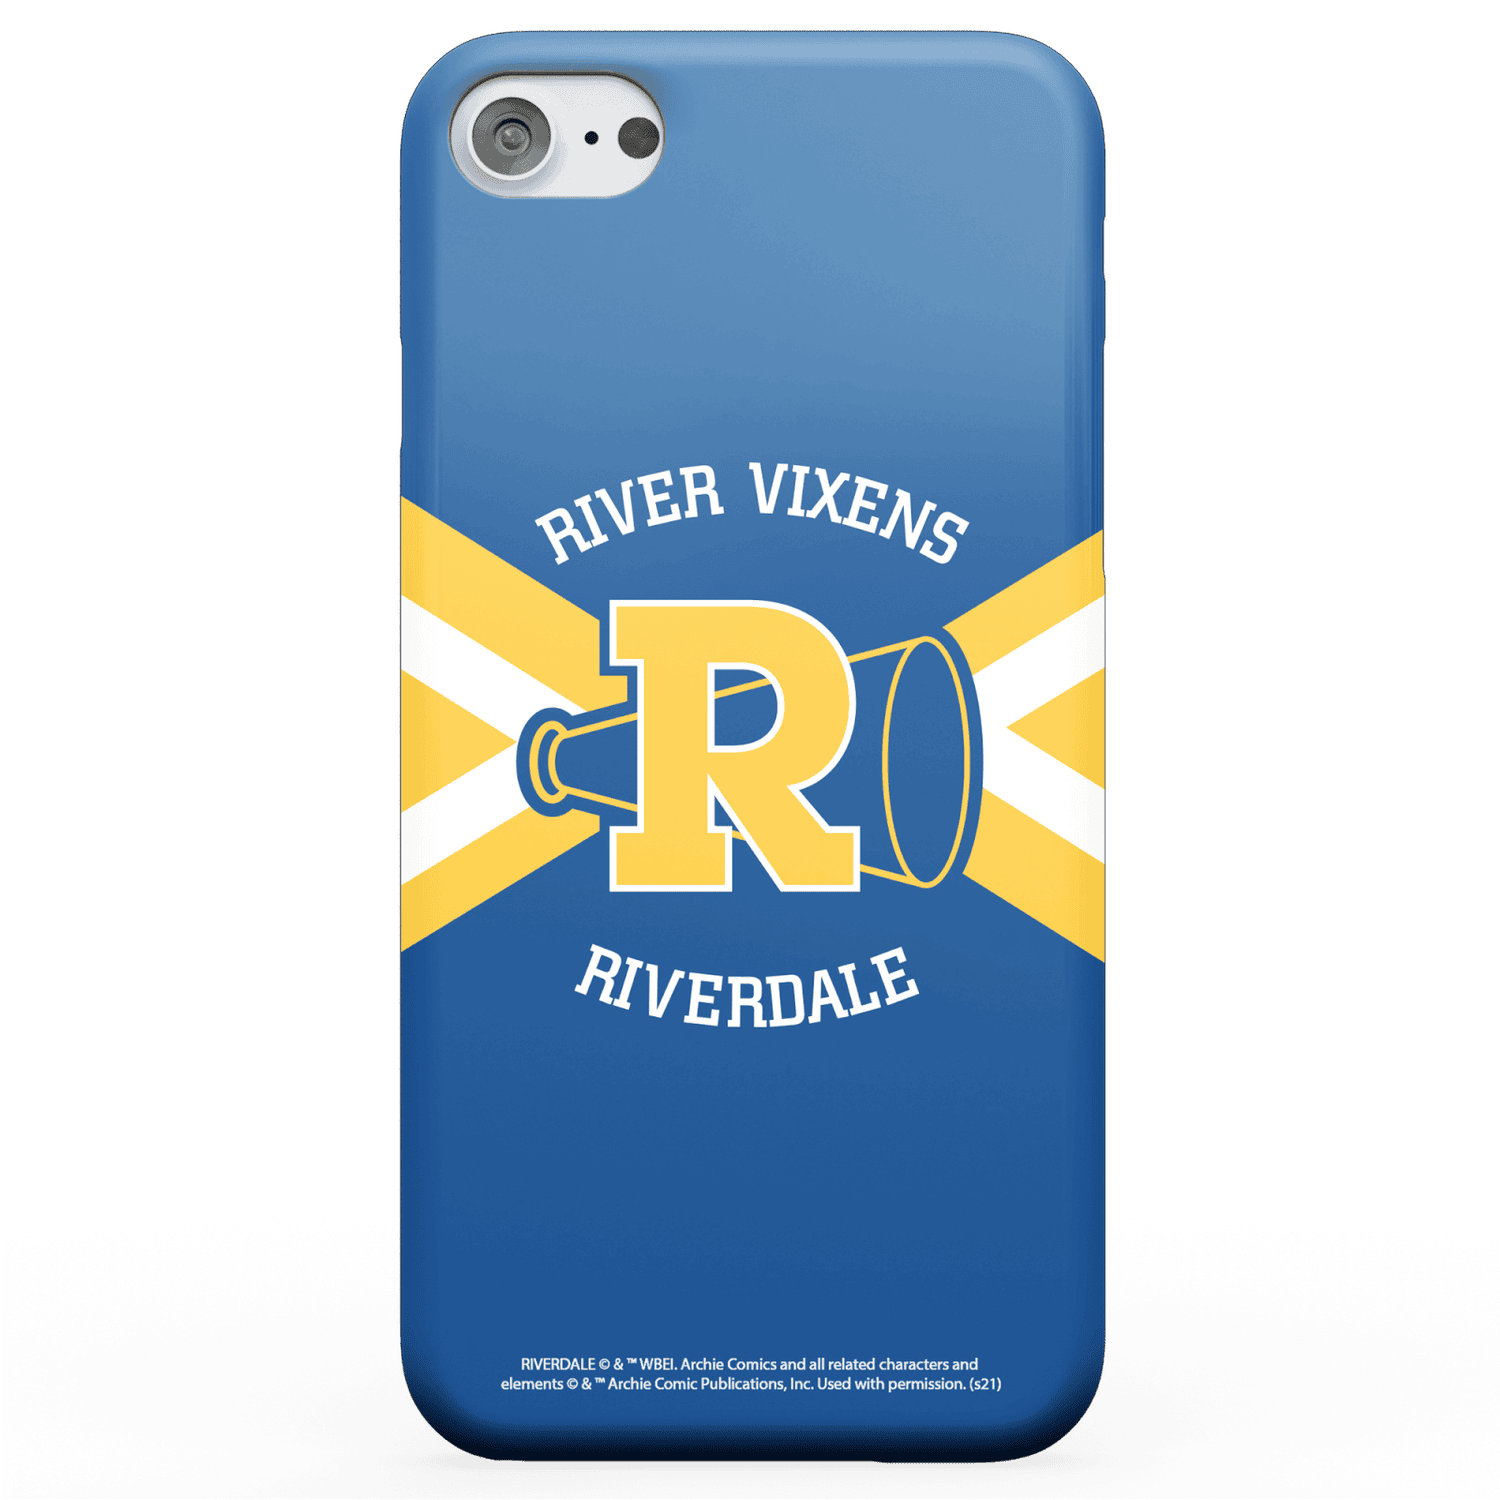 Riverdale River Vixens Phonecase for iPhone and Android - iPhone 8 - Snap case - mat